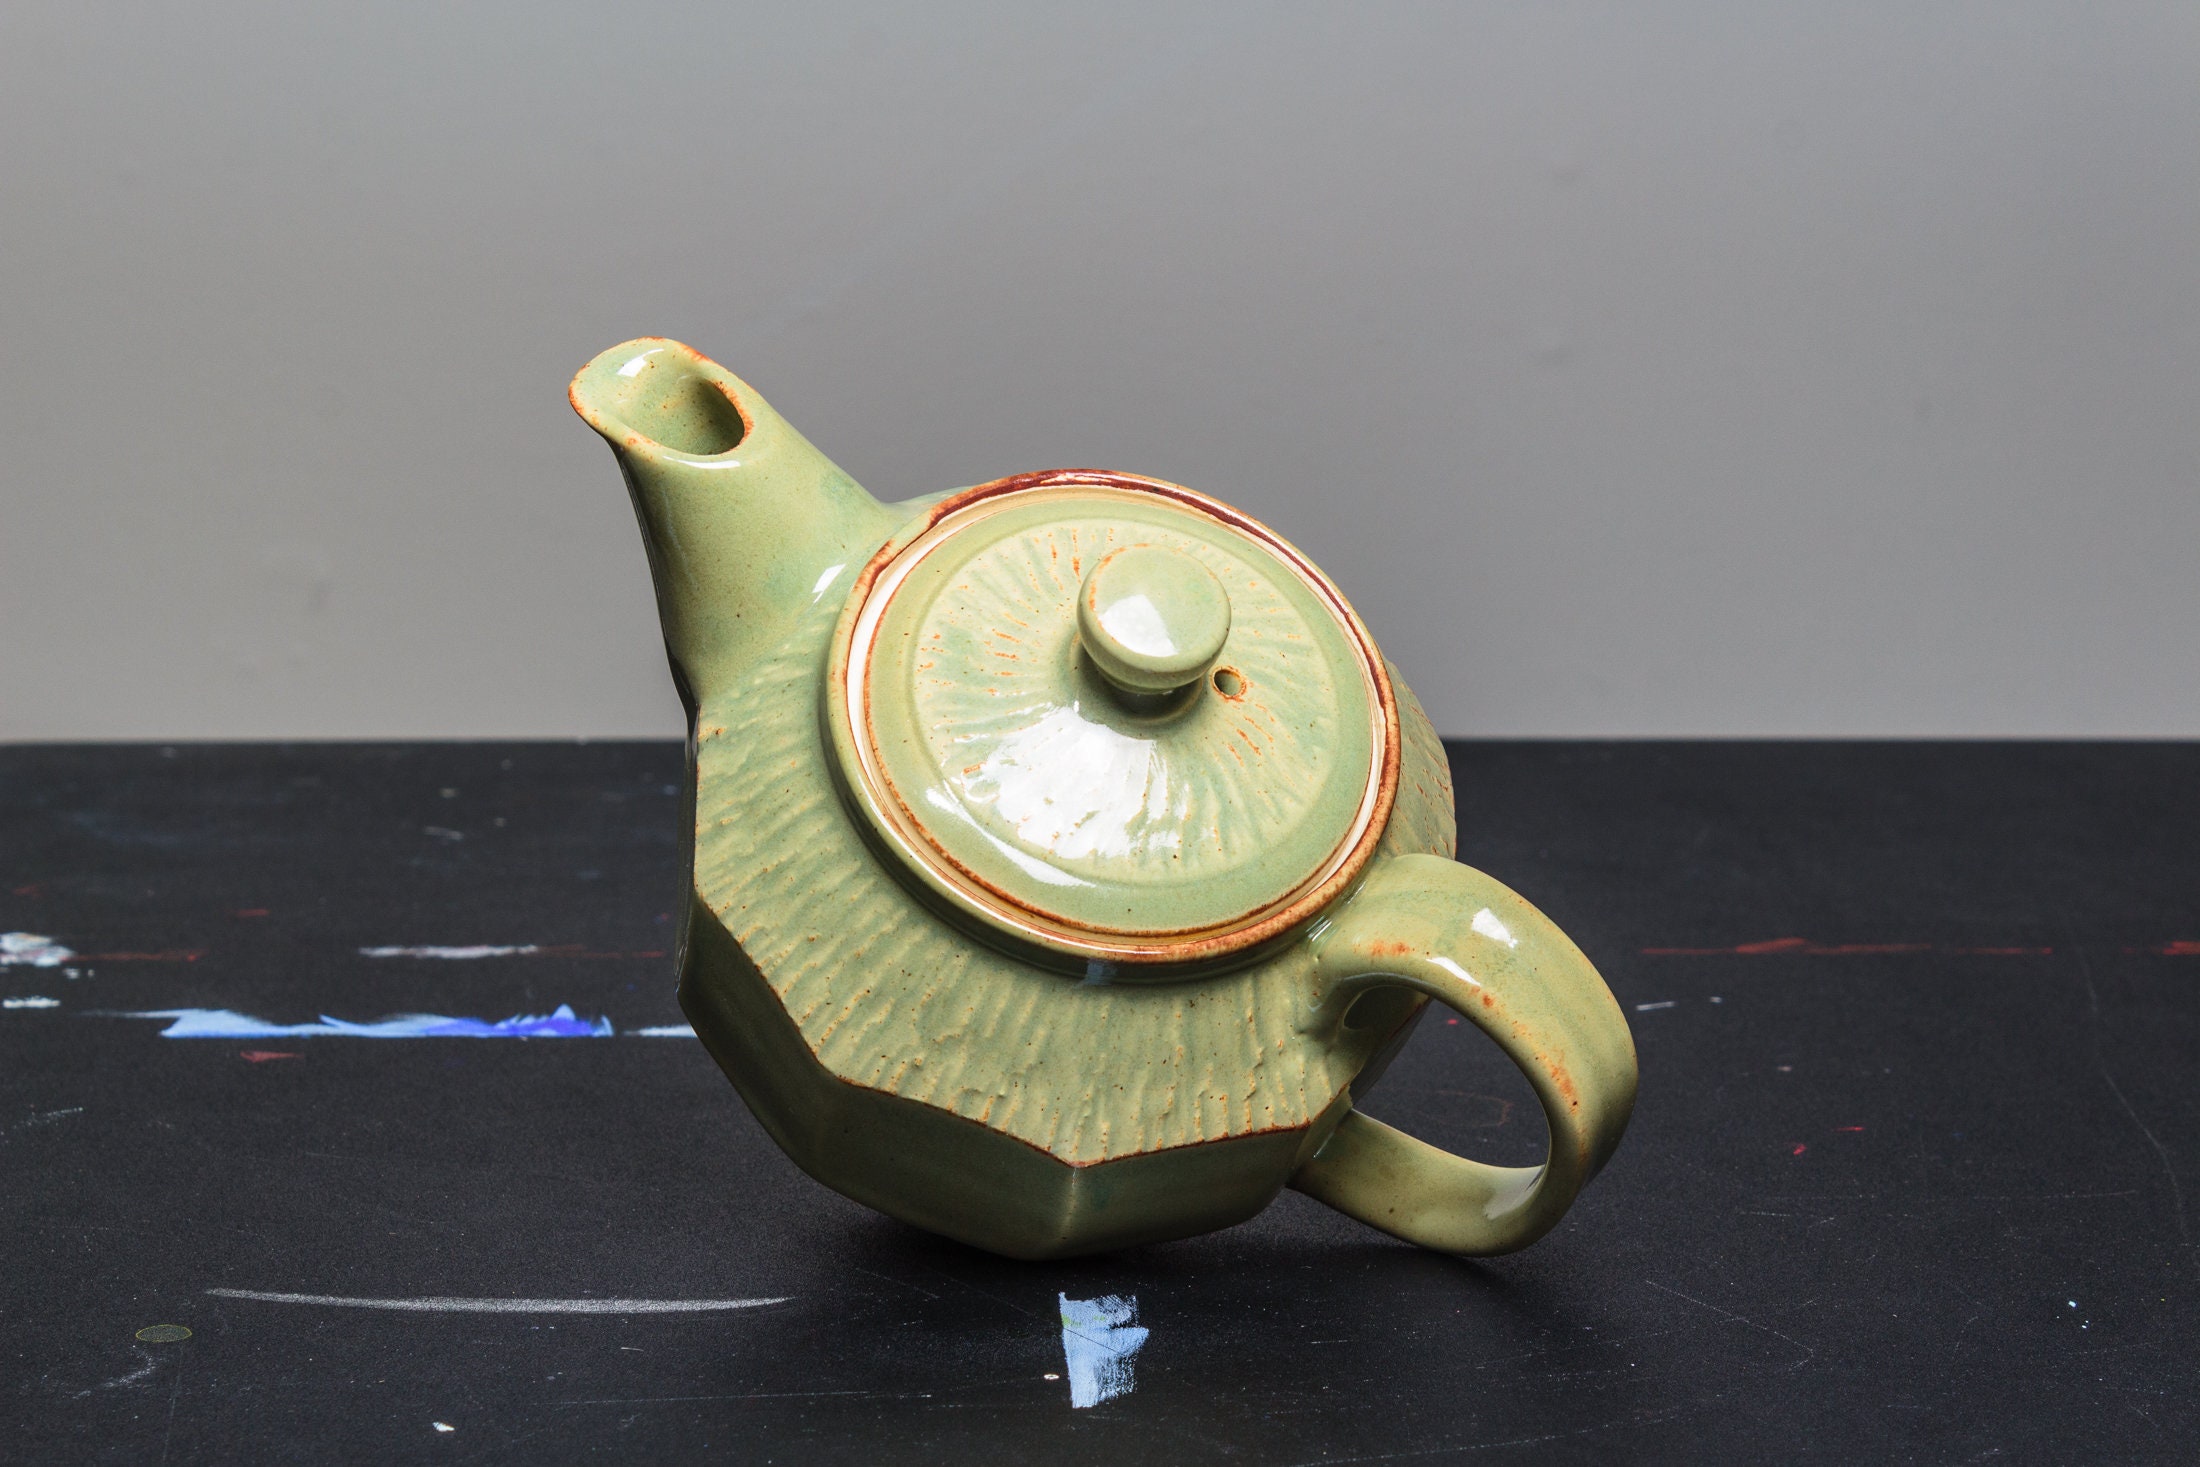 Handmade Ceramic Teapot with Eye Catching Style & Rope Wrapped Handle